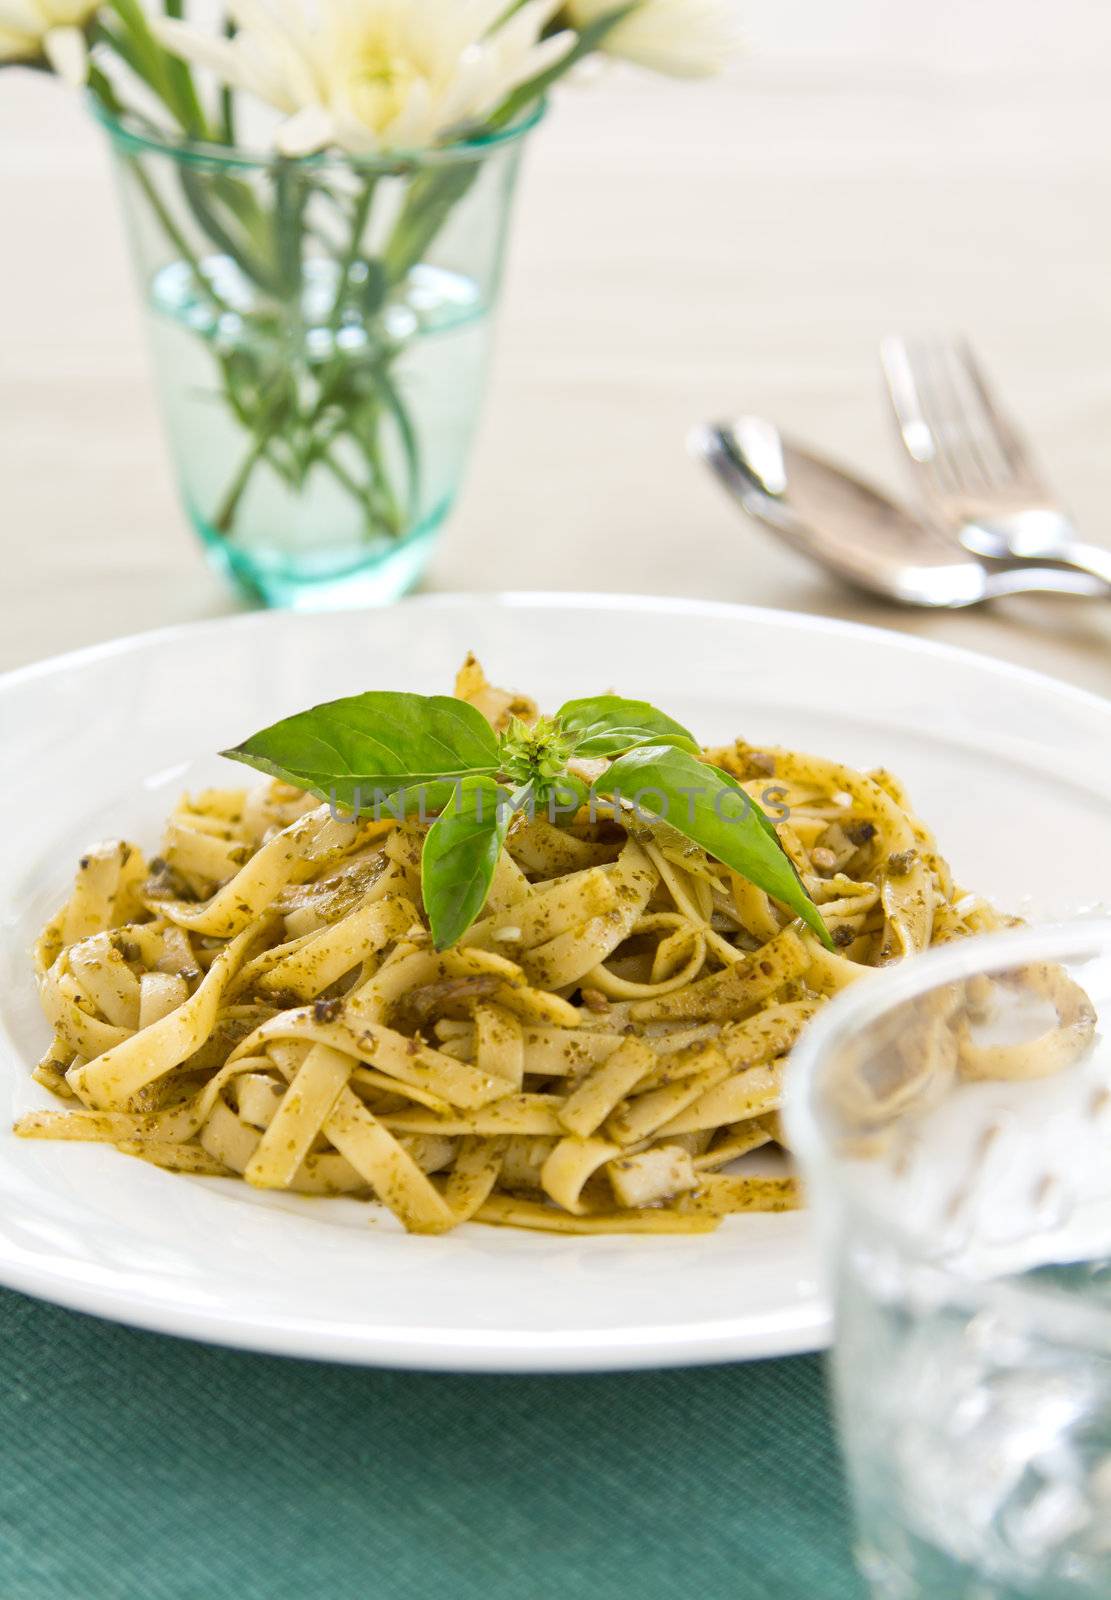 Fettuccine with pesto by vanillaechoes